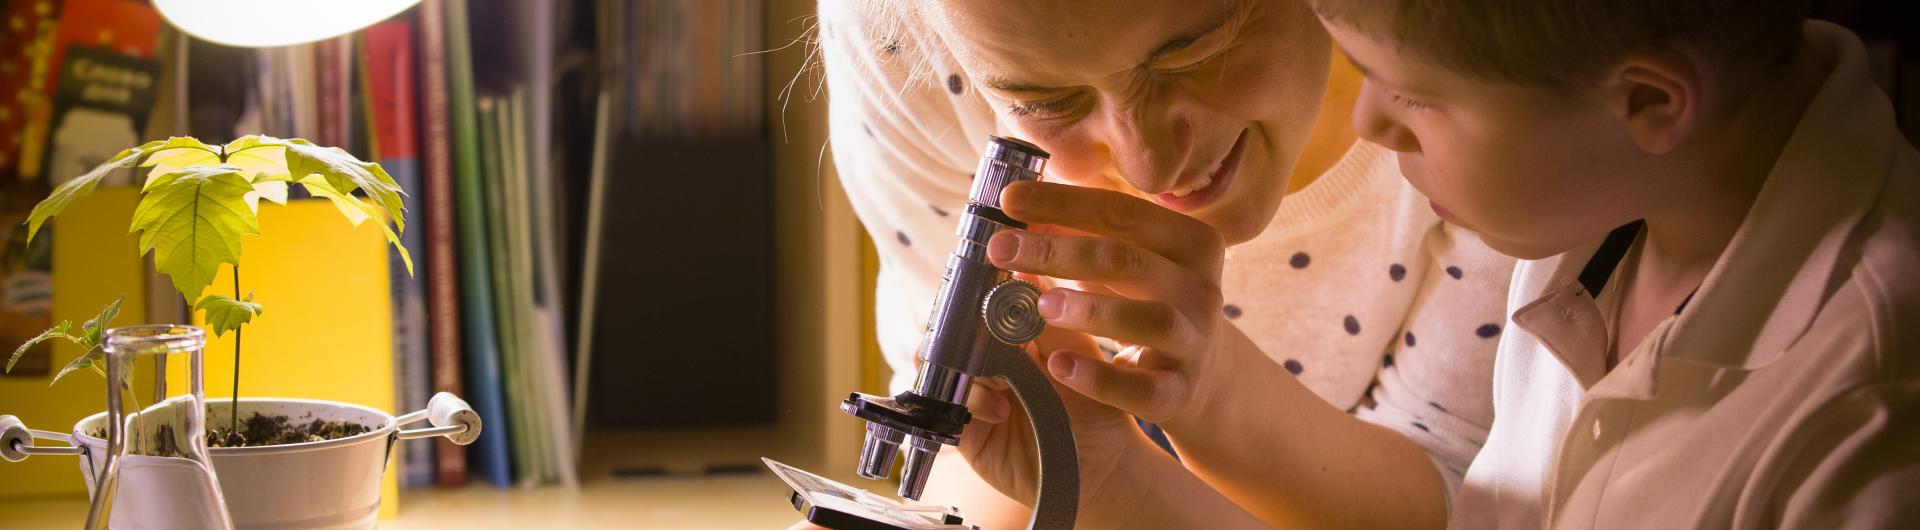 Woman and son looking at a microscope